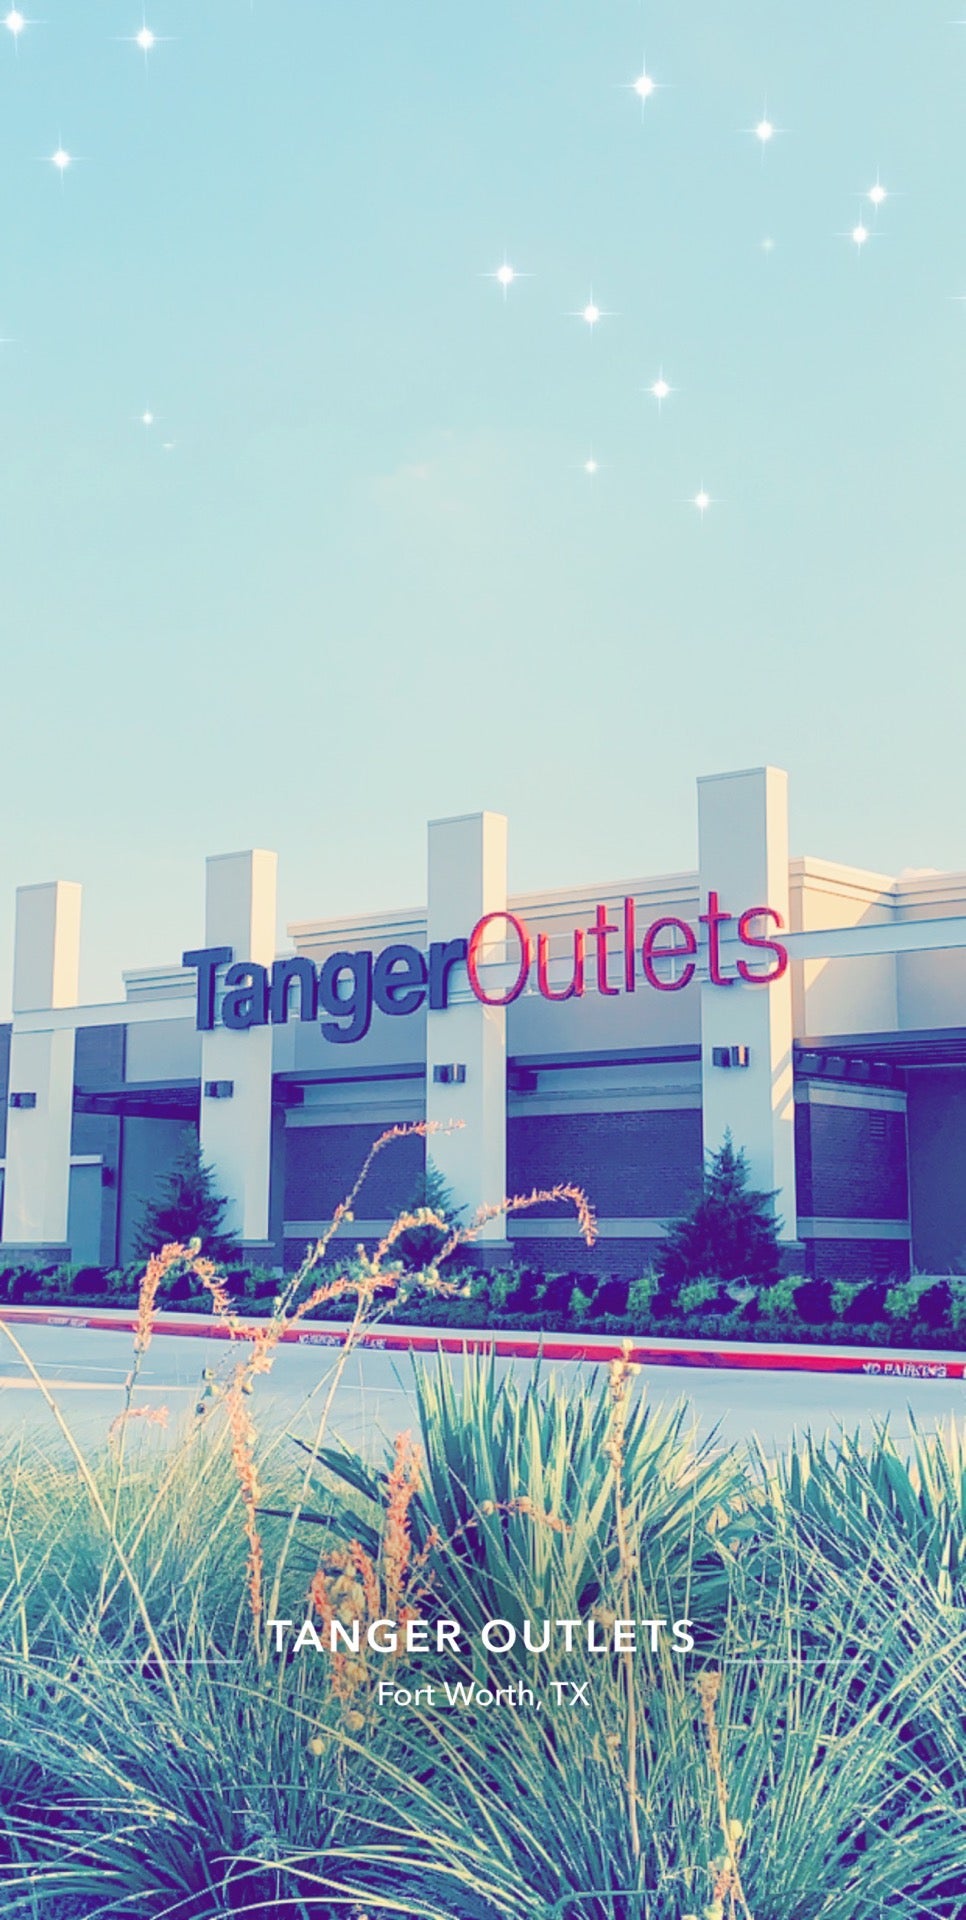 Tanger Outlets, Fort Worth, TX